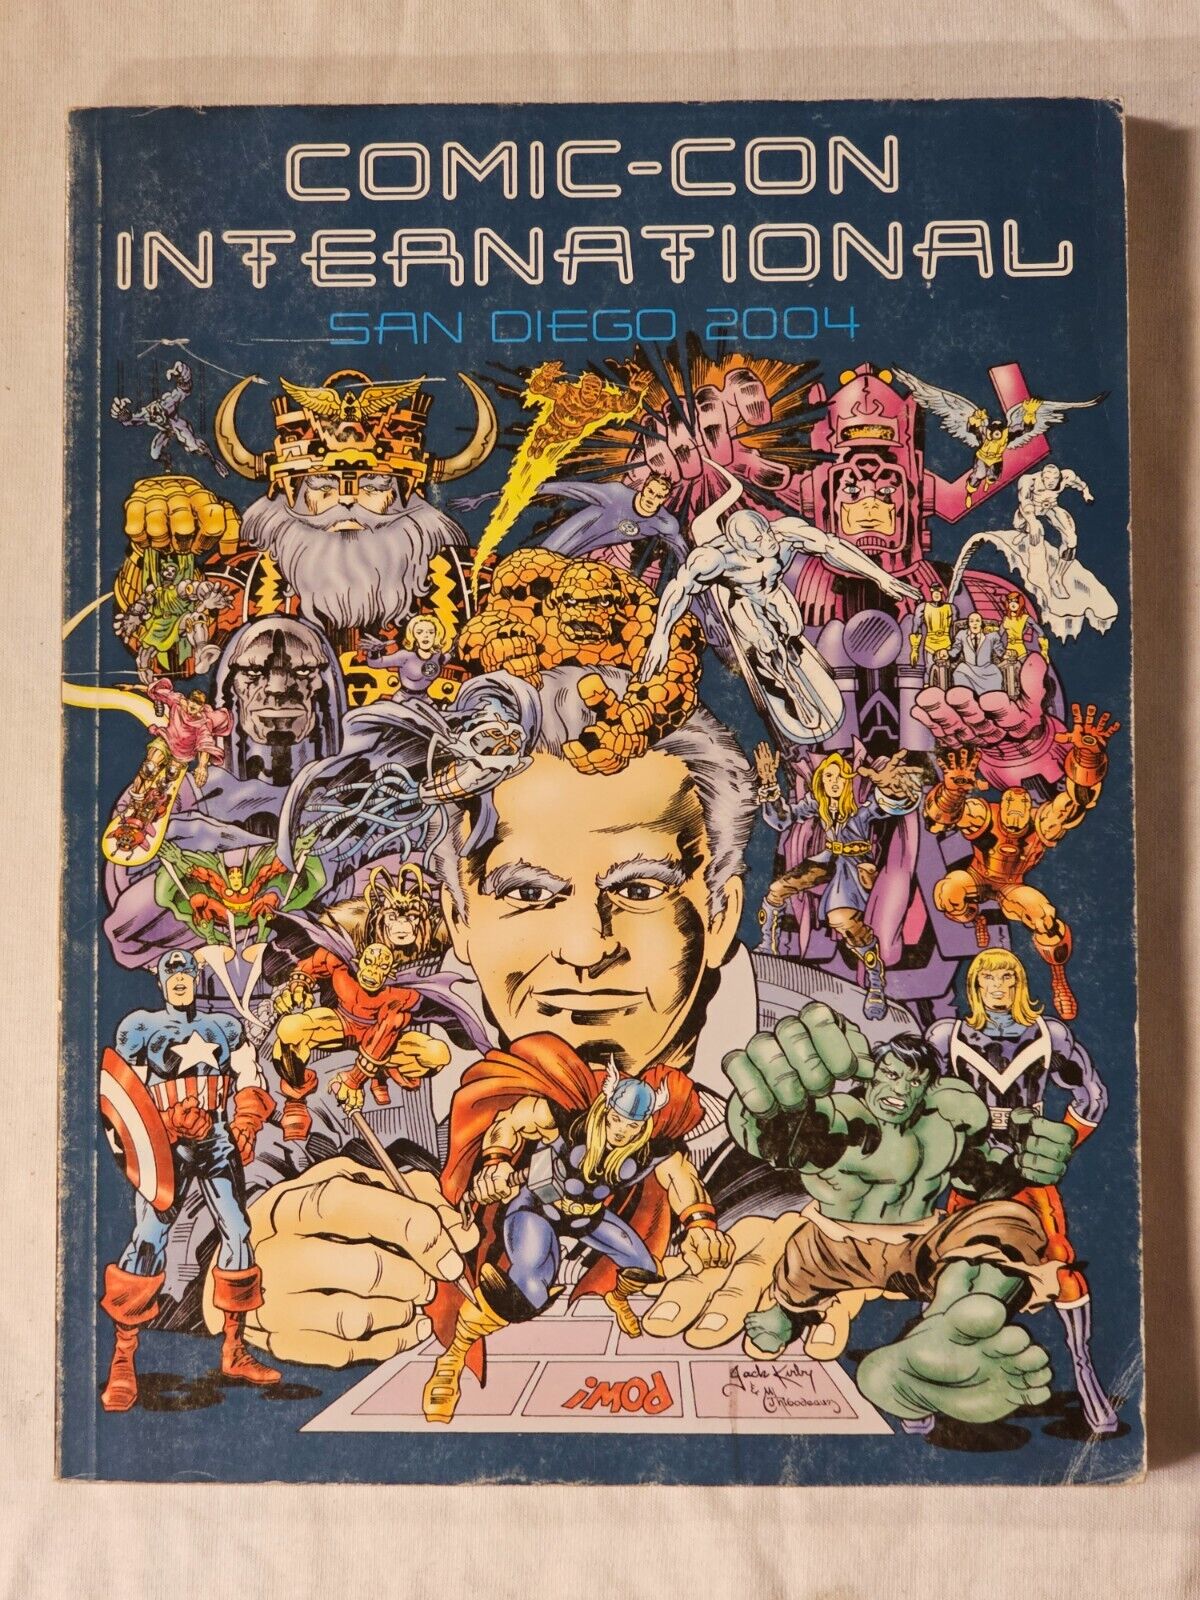 SDCC2004 San Diego Comic Con International 2004 Jack Kirby Art Cover Book SDCC